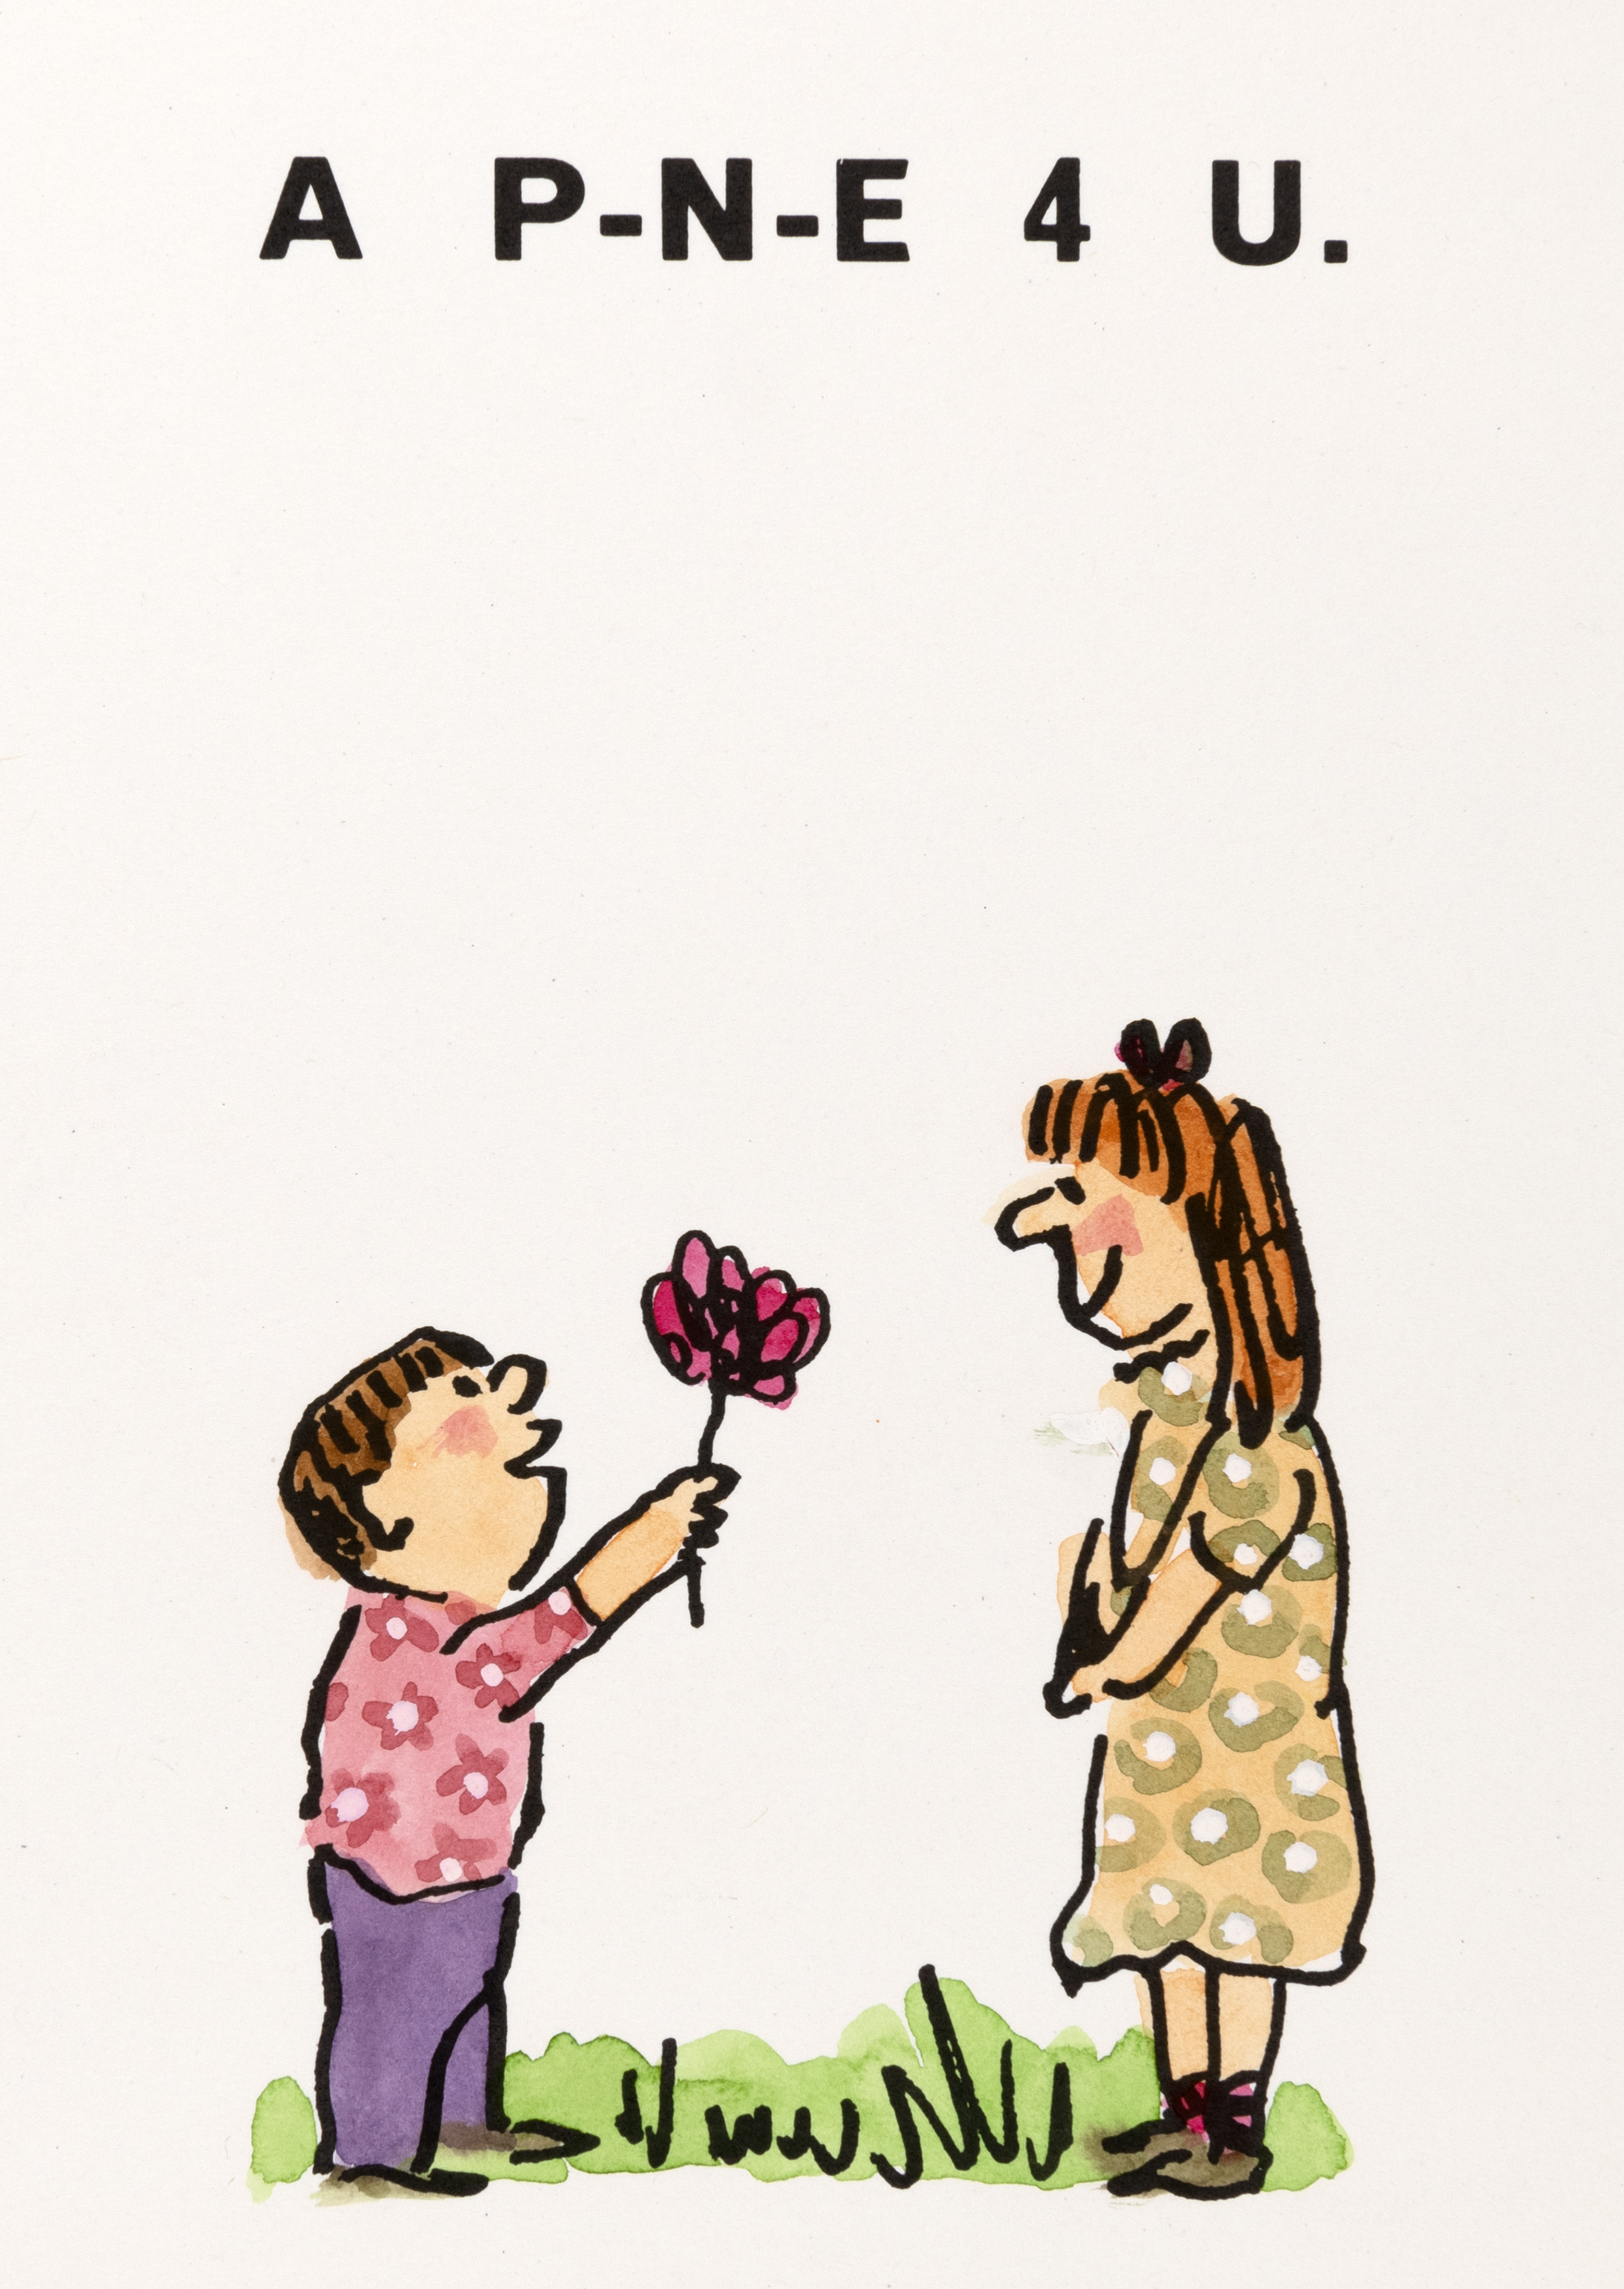 Illustration of boy giving girl flower and text A P-N-E 4 U. 